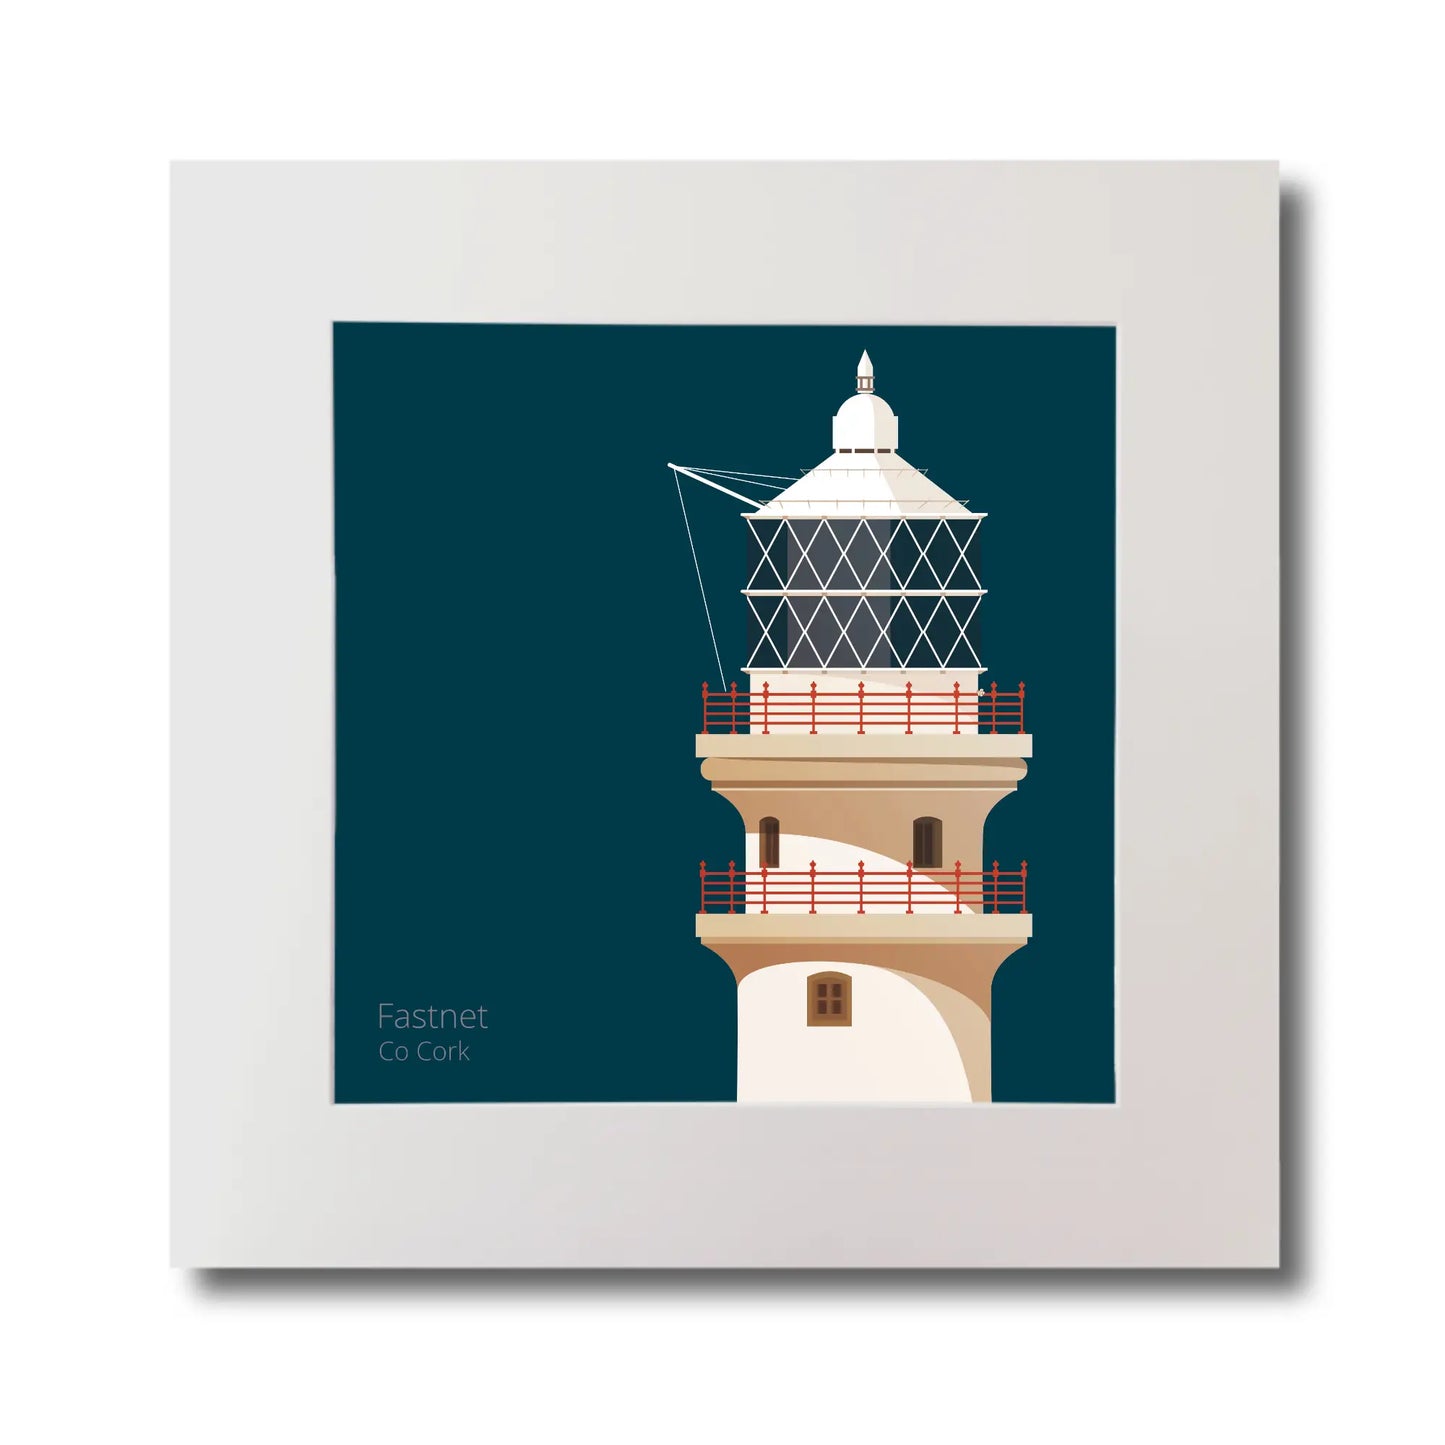 Illustration of Fastnet lighthouse on a midnight blue background, mounted and measuring 30x30cm.